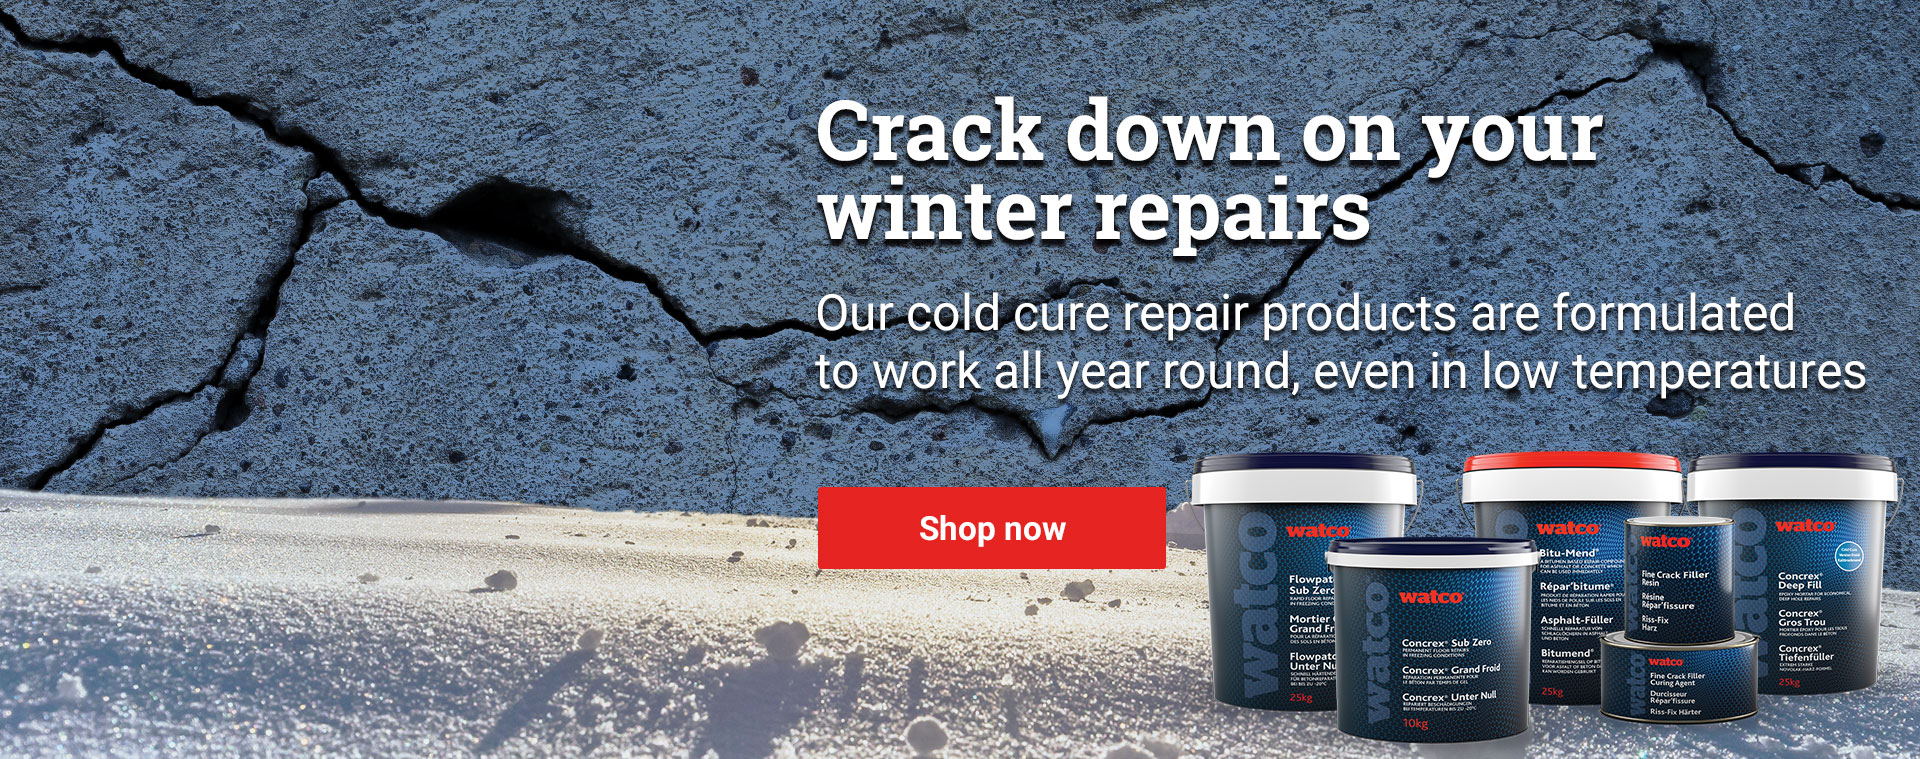 Crack down on your winter repairs